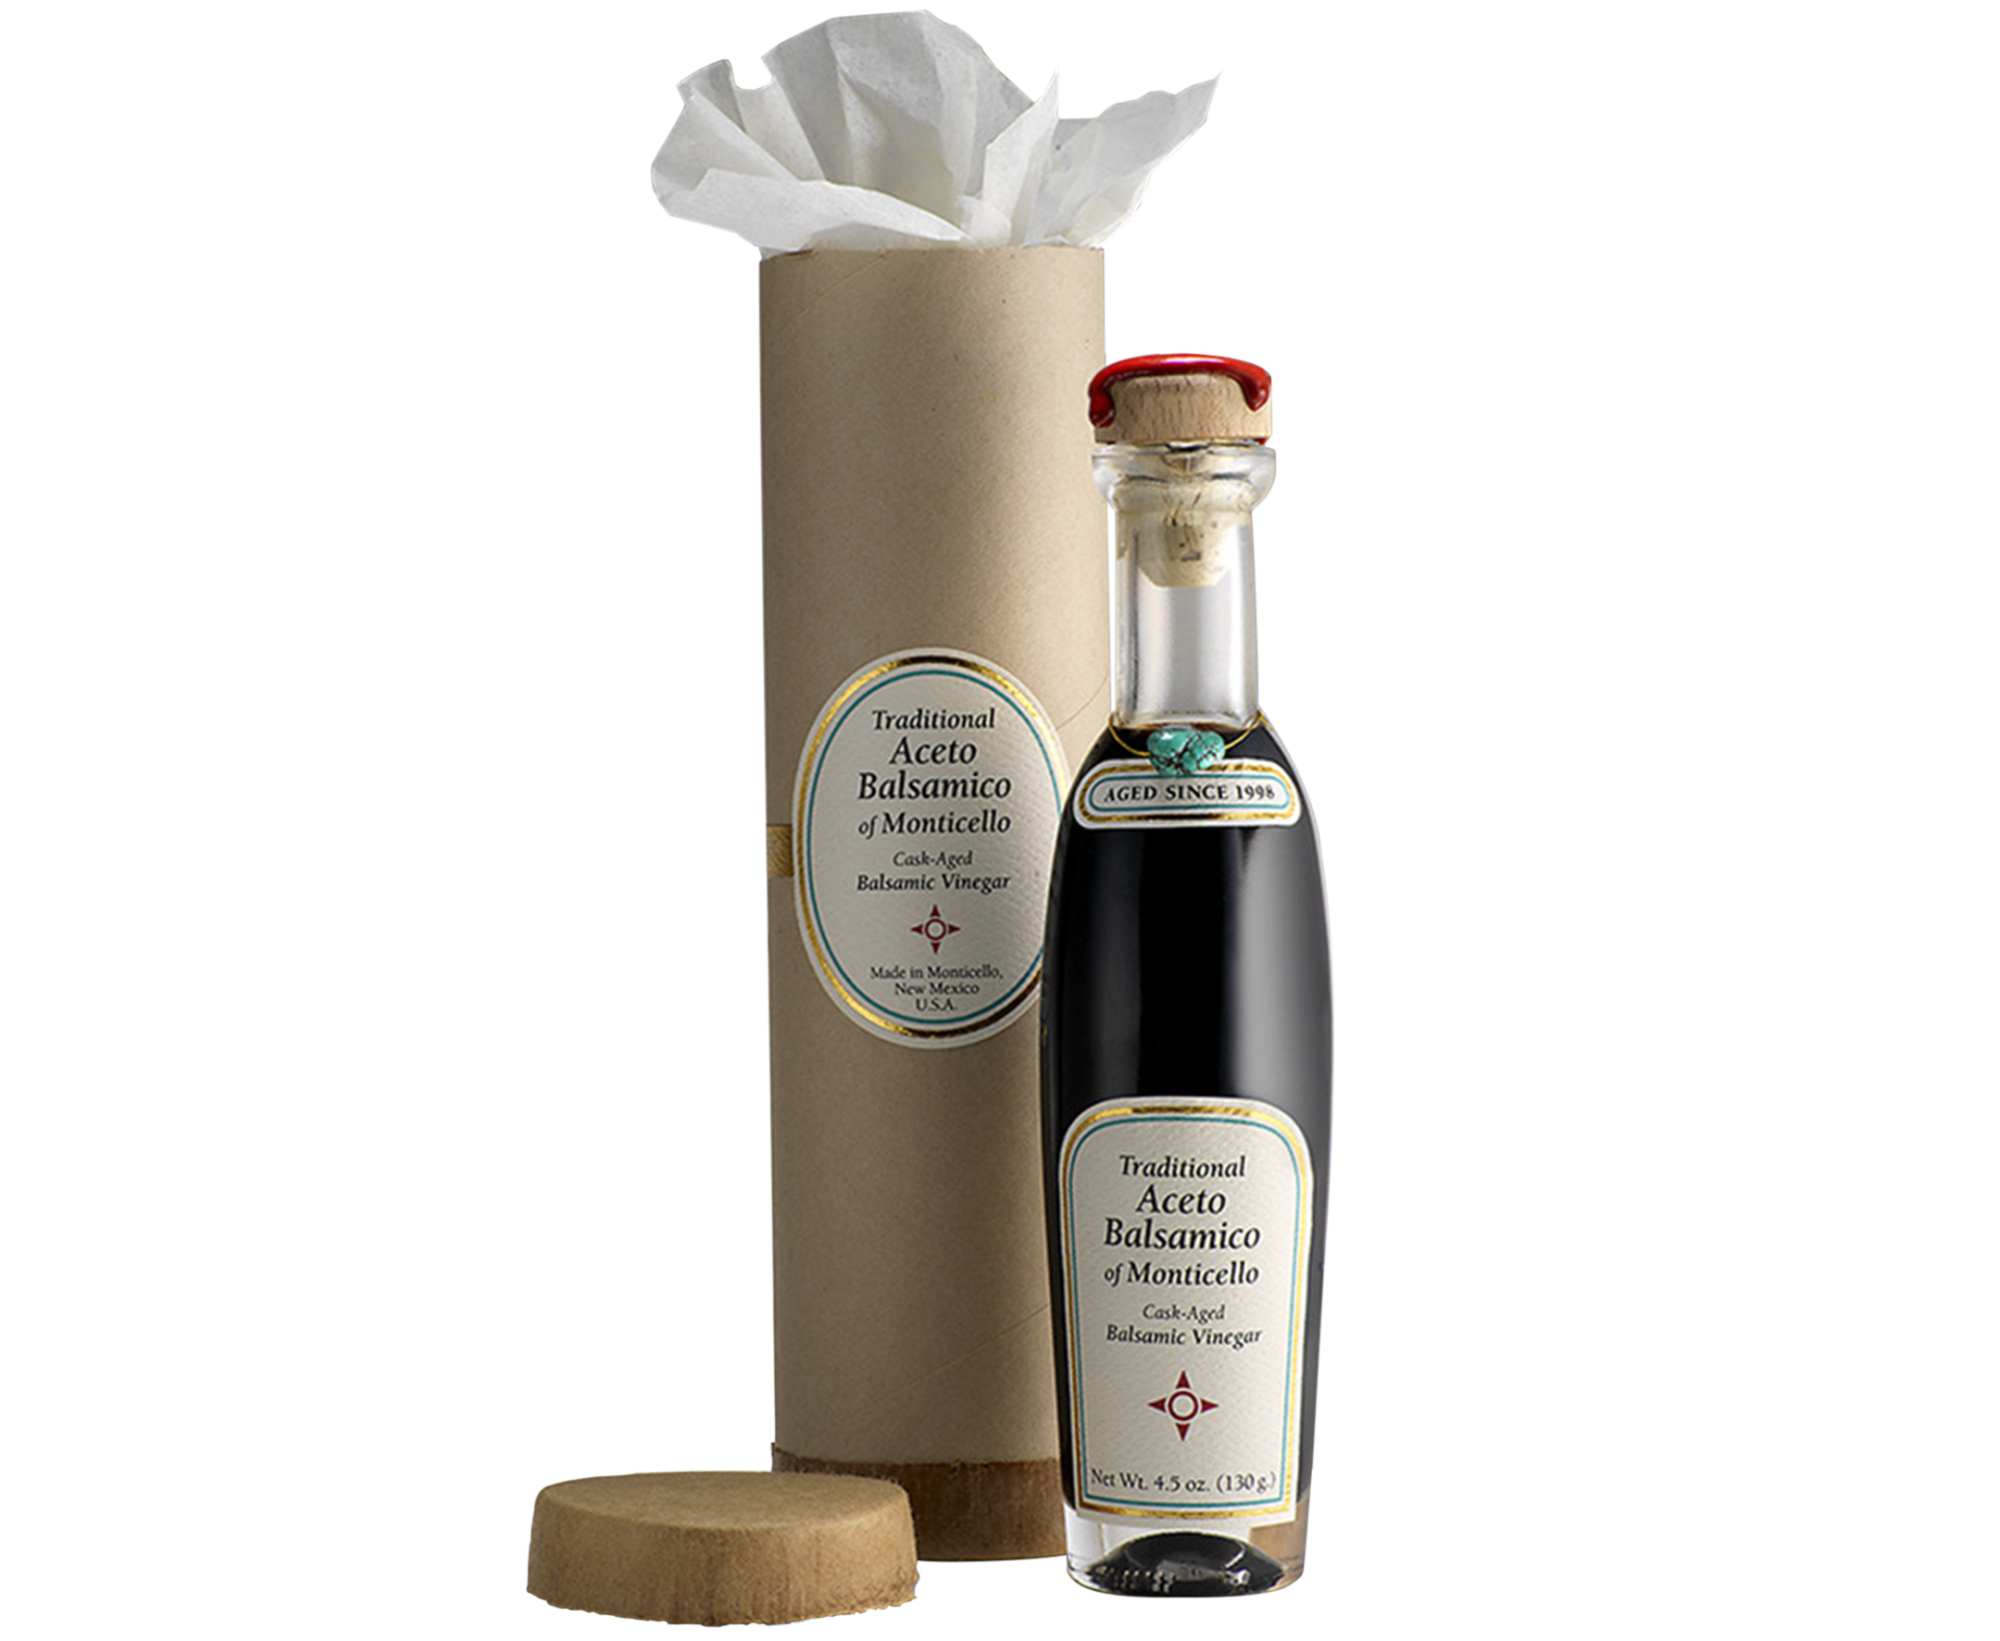 A bottle of aceto balsamico of Monticello sits next to its packaging